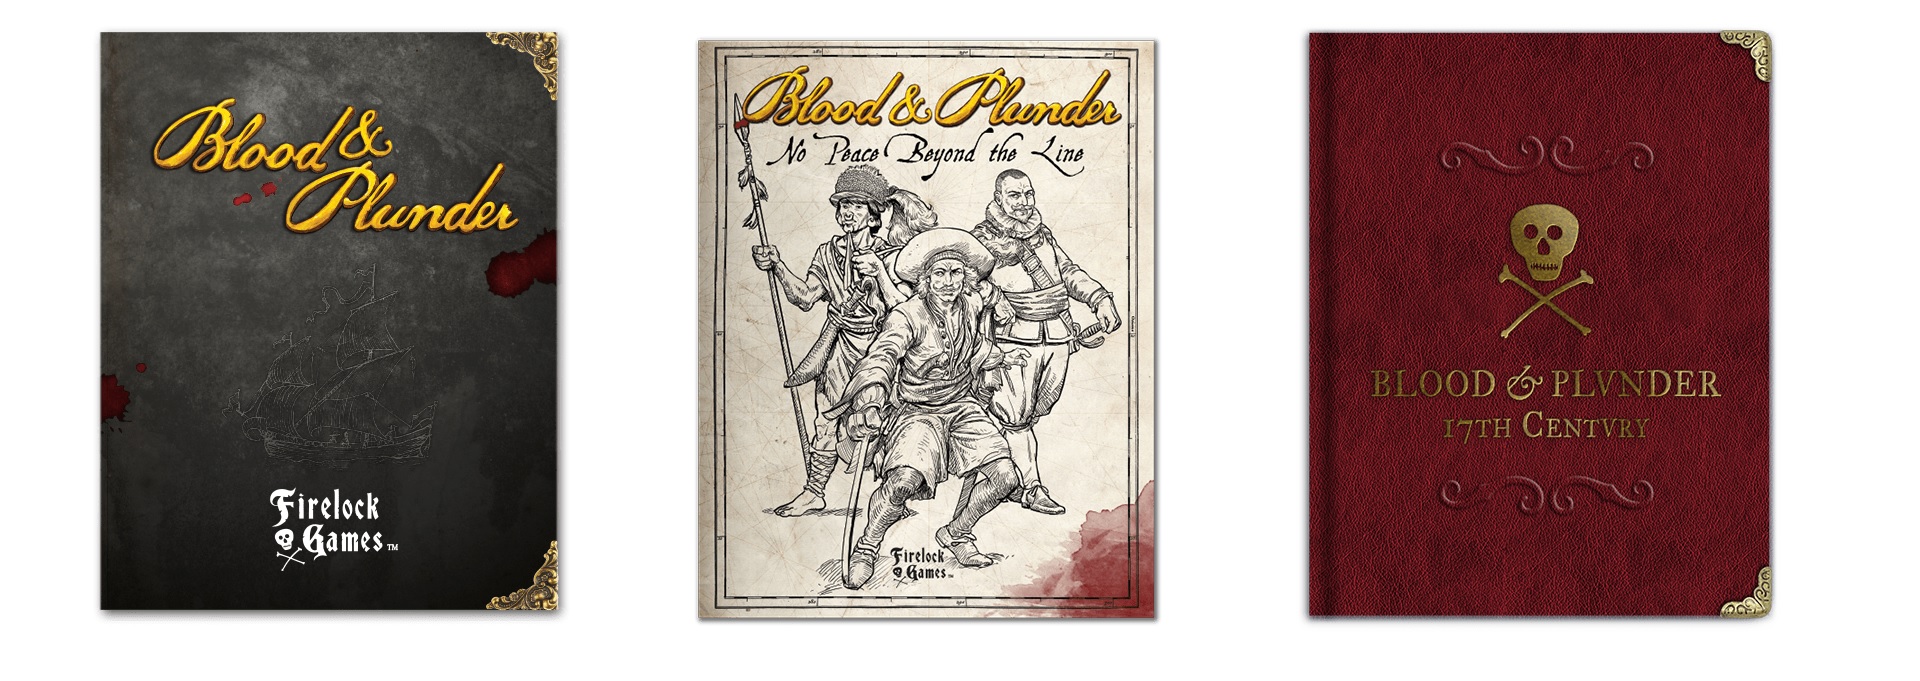 2018, Hardcover Blood and Plunder No Peace Beyond the Line by Firelock Games for sale online